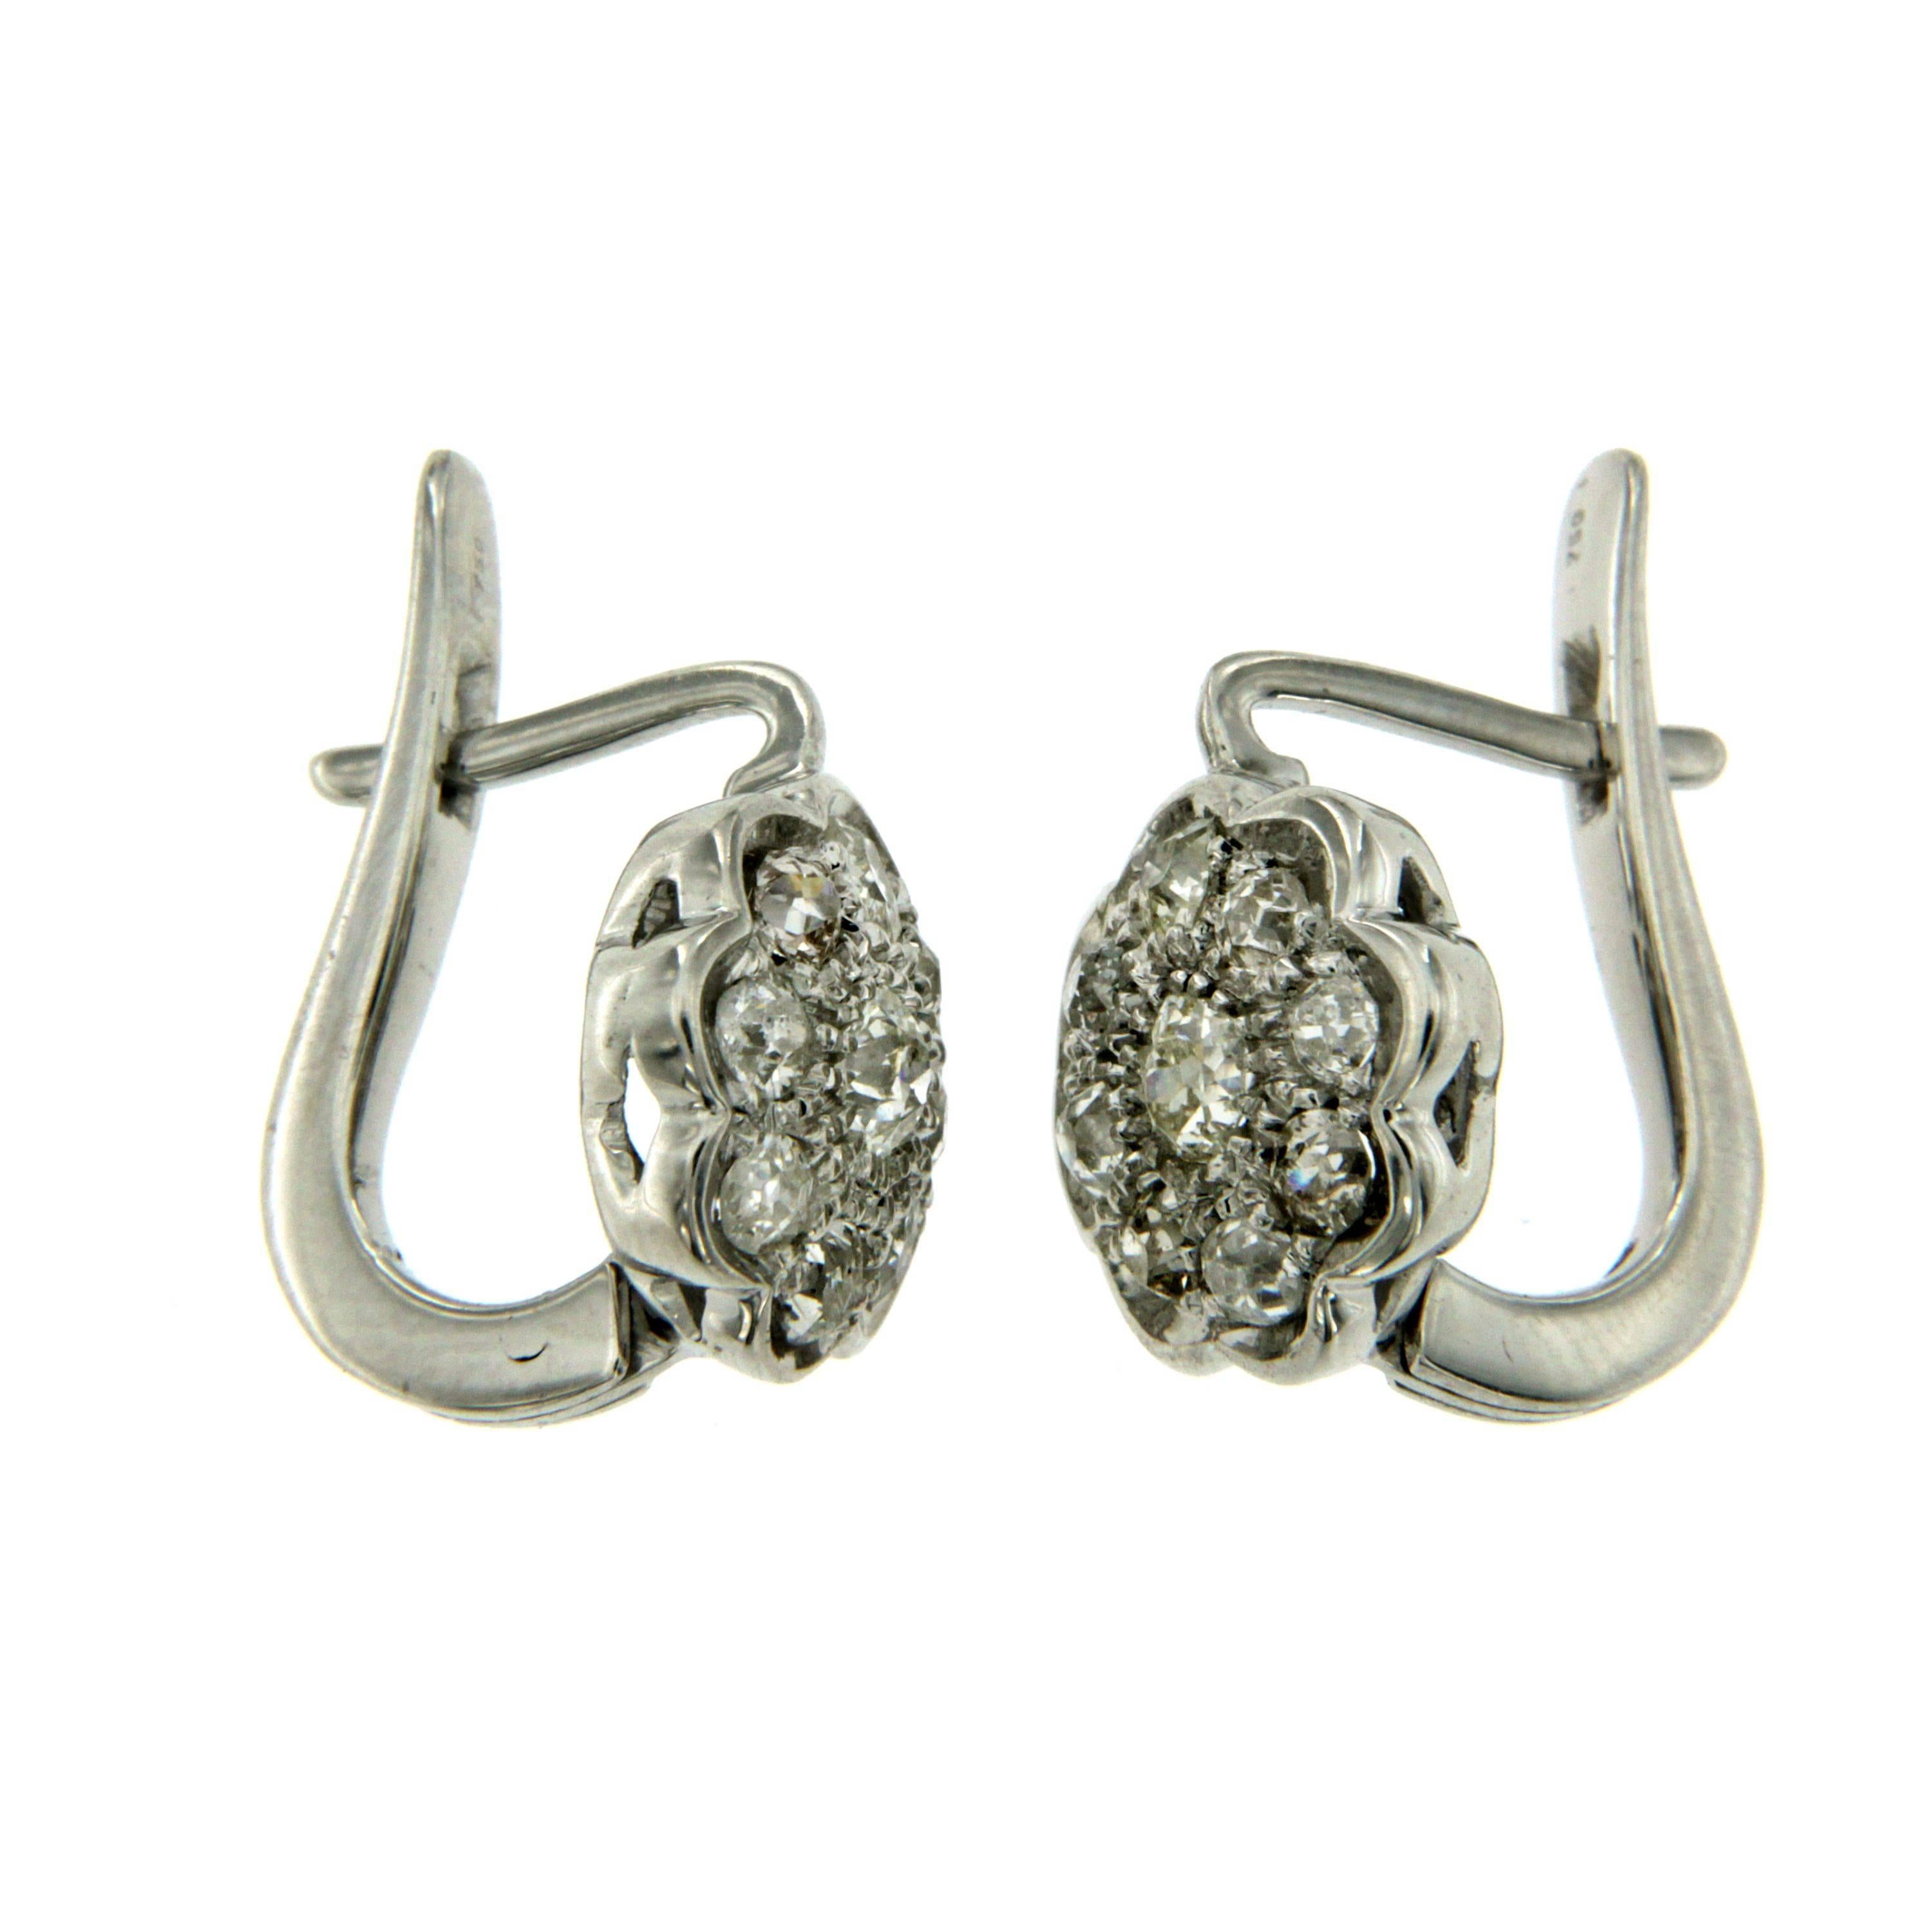 Cluster earrings in 18k white gold authentic from 1960 period.
The Earrings are mounted with approx. 2.00 carat of old cut Diamonds H-I color Vs clarity.

CONDITION: Pre-owned - Excellent 
METAL: 18k white Gold 
STONE: Diamond 2.00 total carats